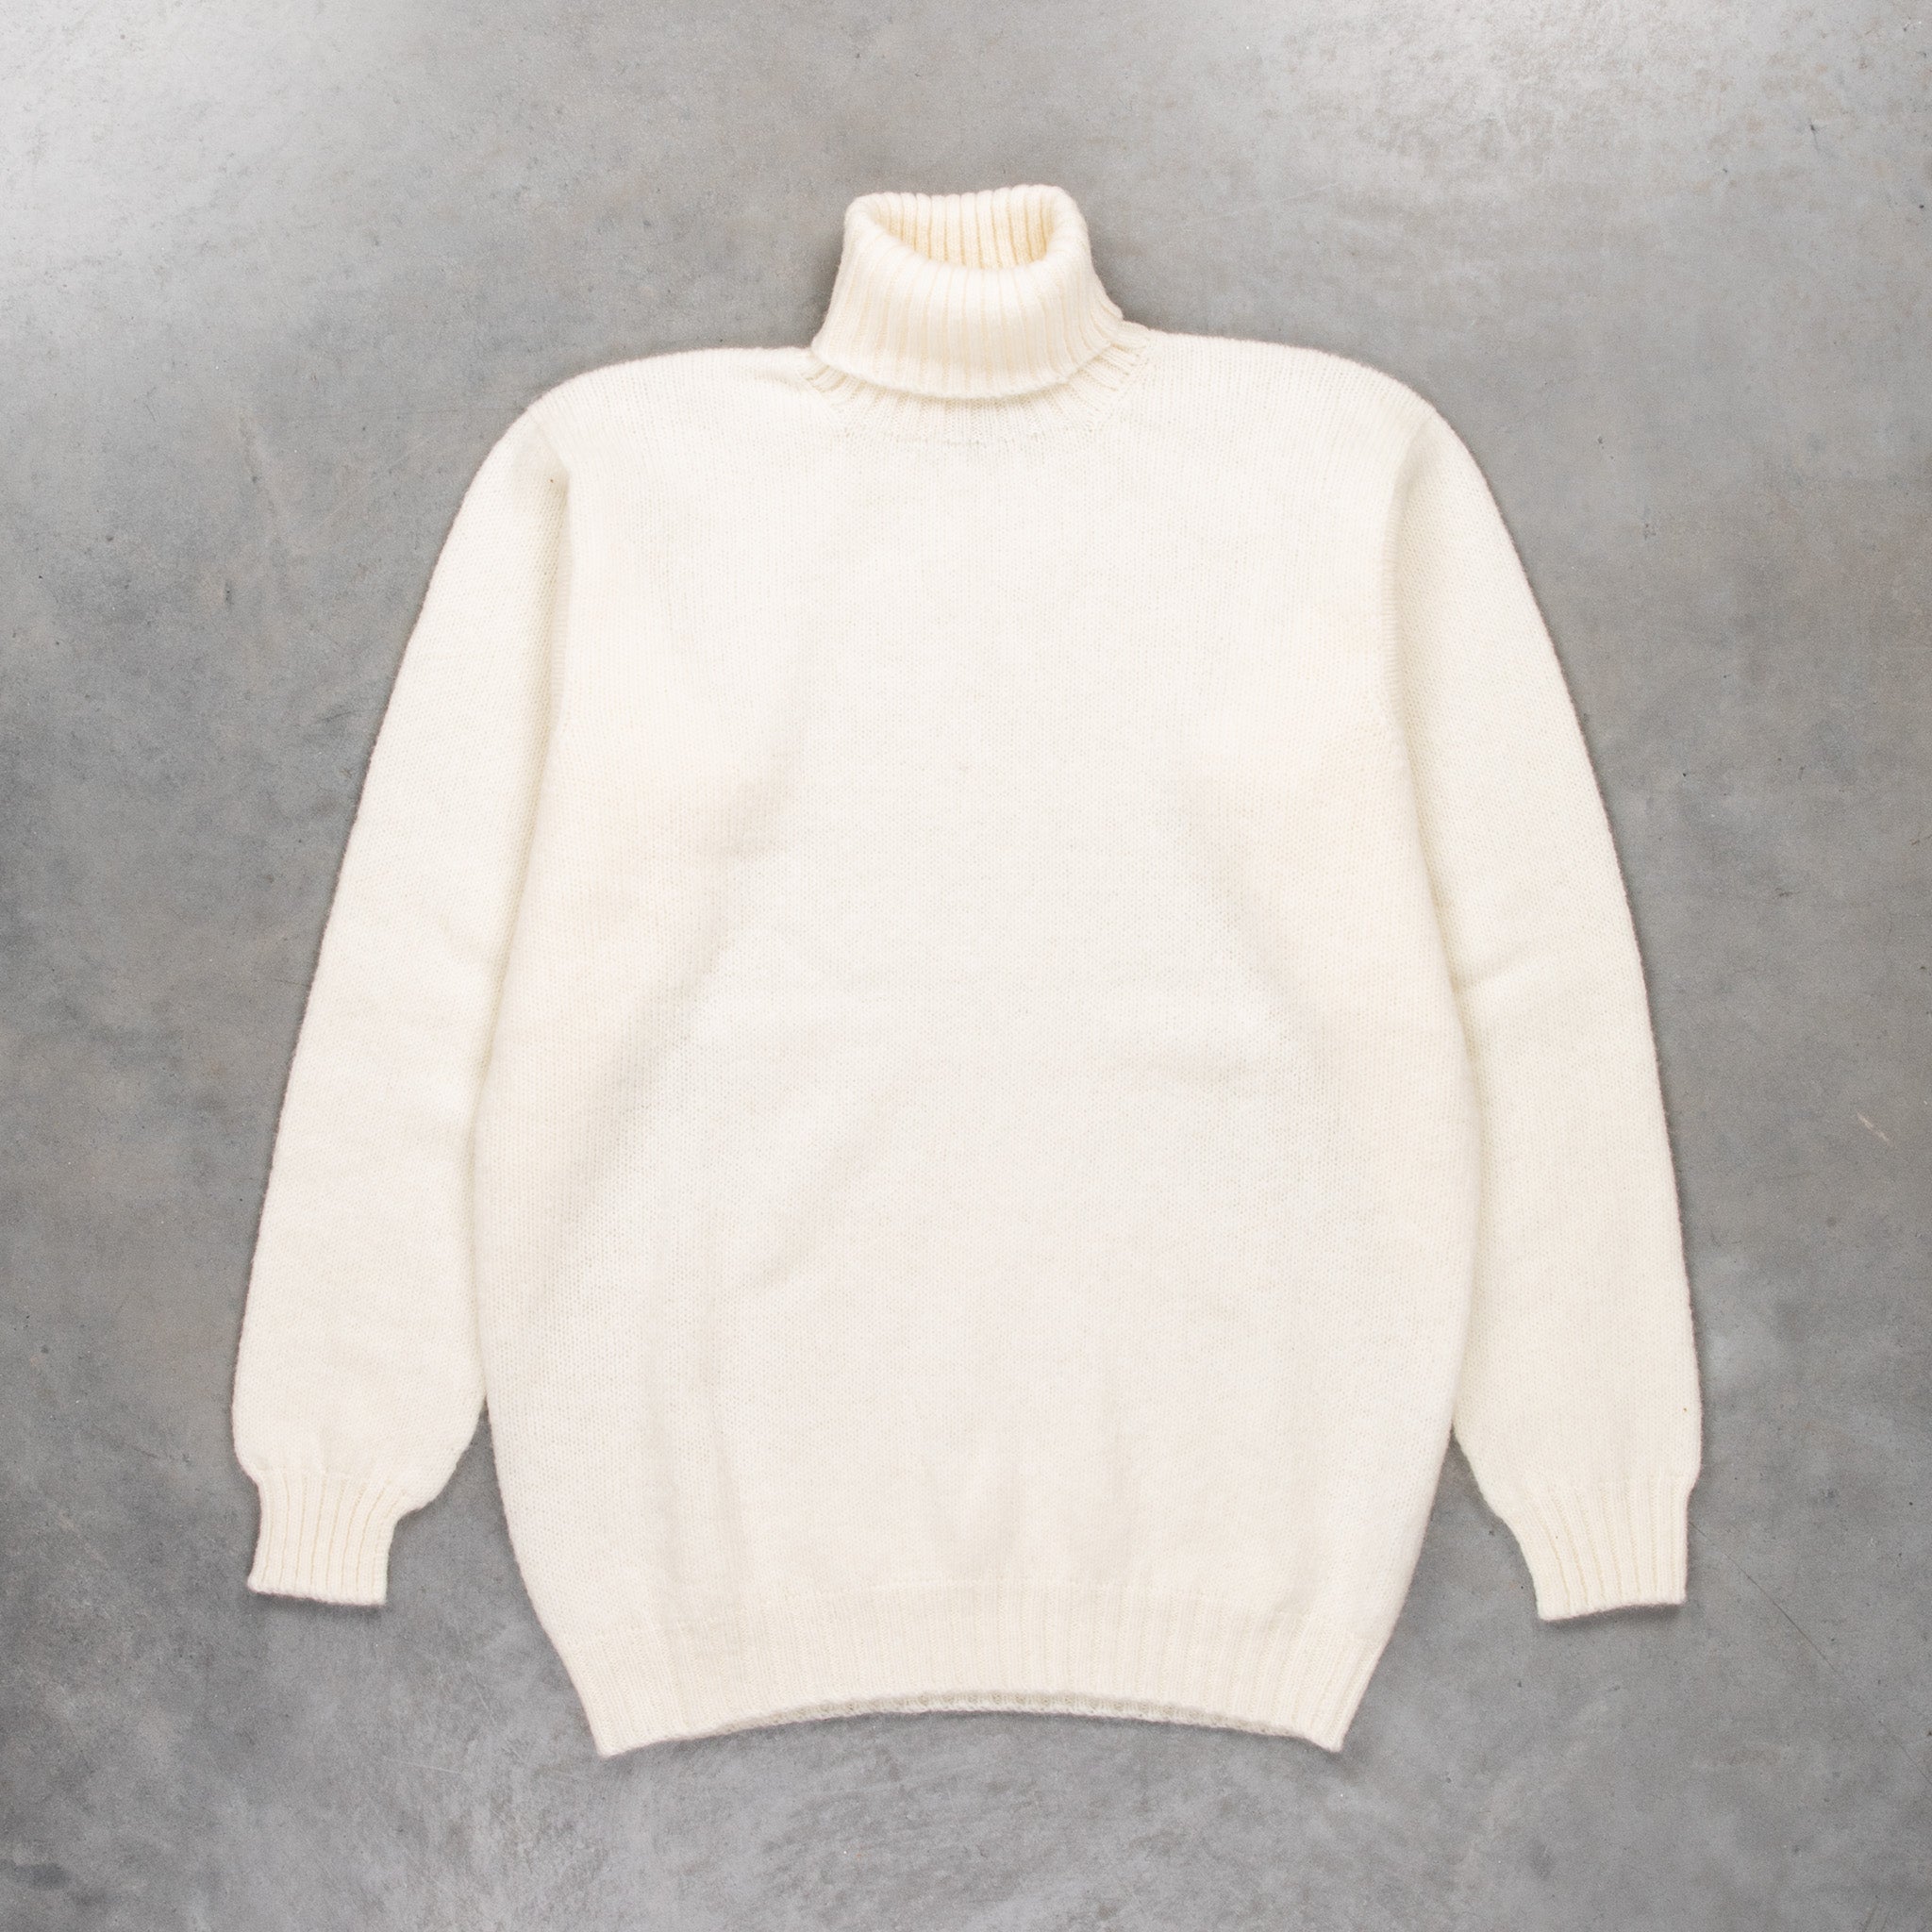 Laurence J. Smith Super Soft Seamless Roll Neck Pullover Winter White